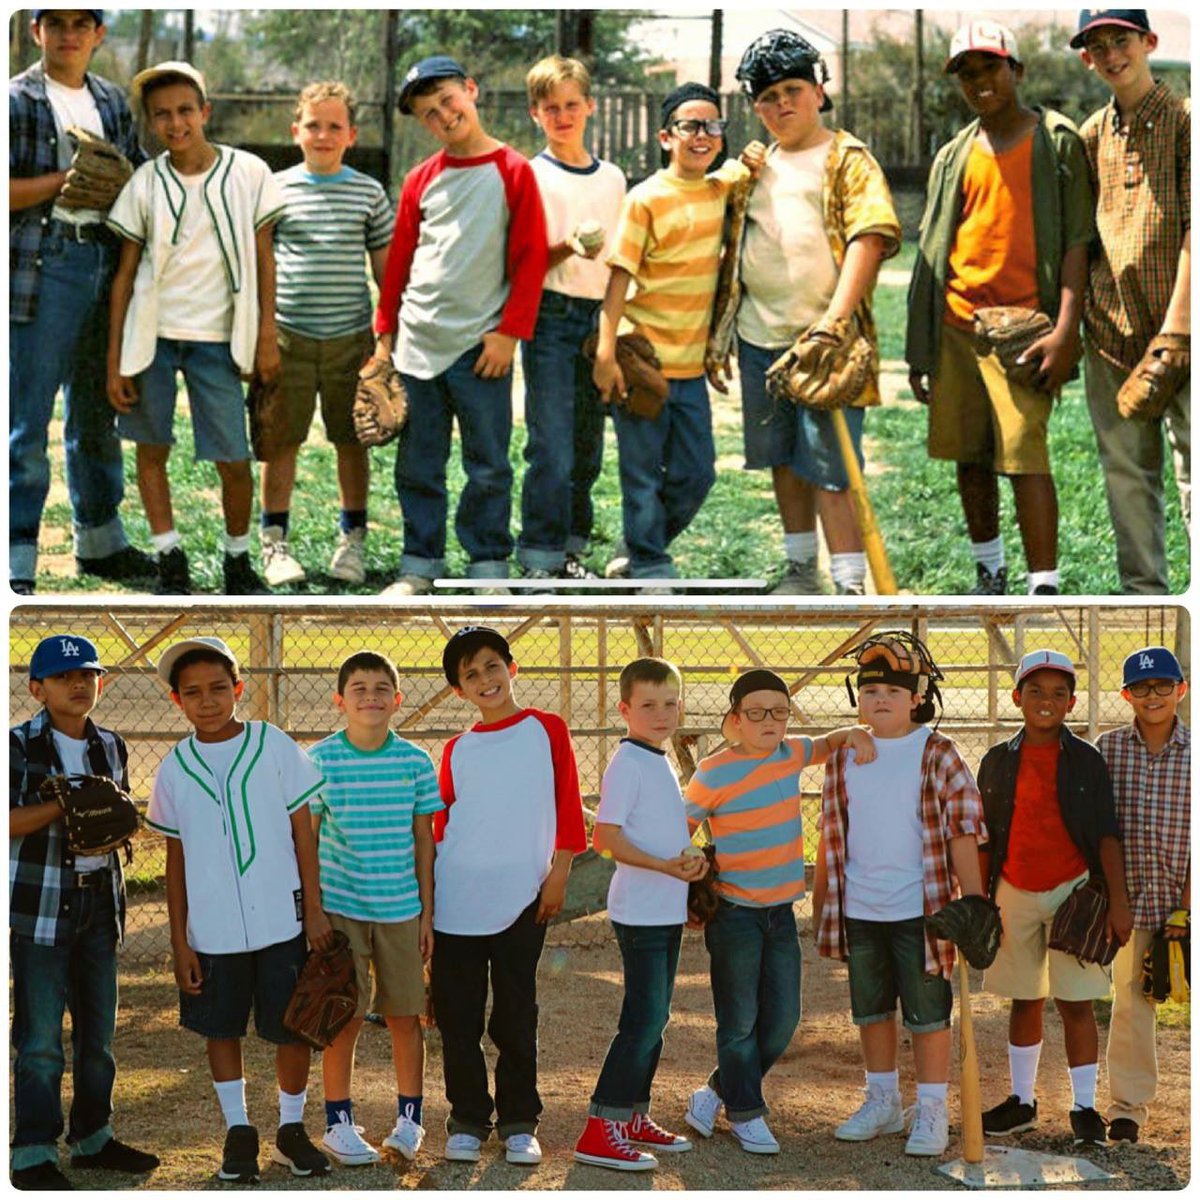 The best Halloween costume I saw was this group of 4th graders who recreate...